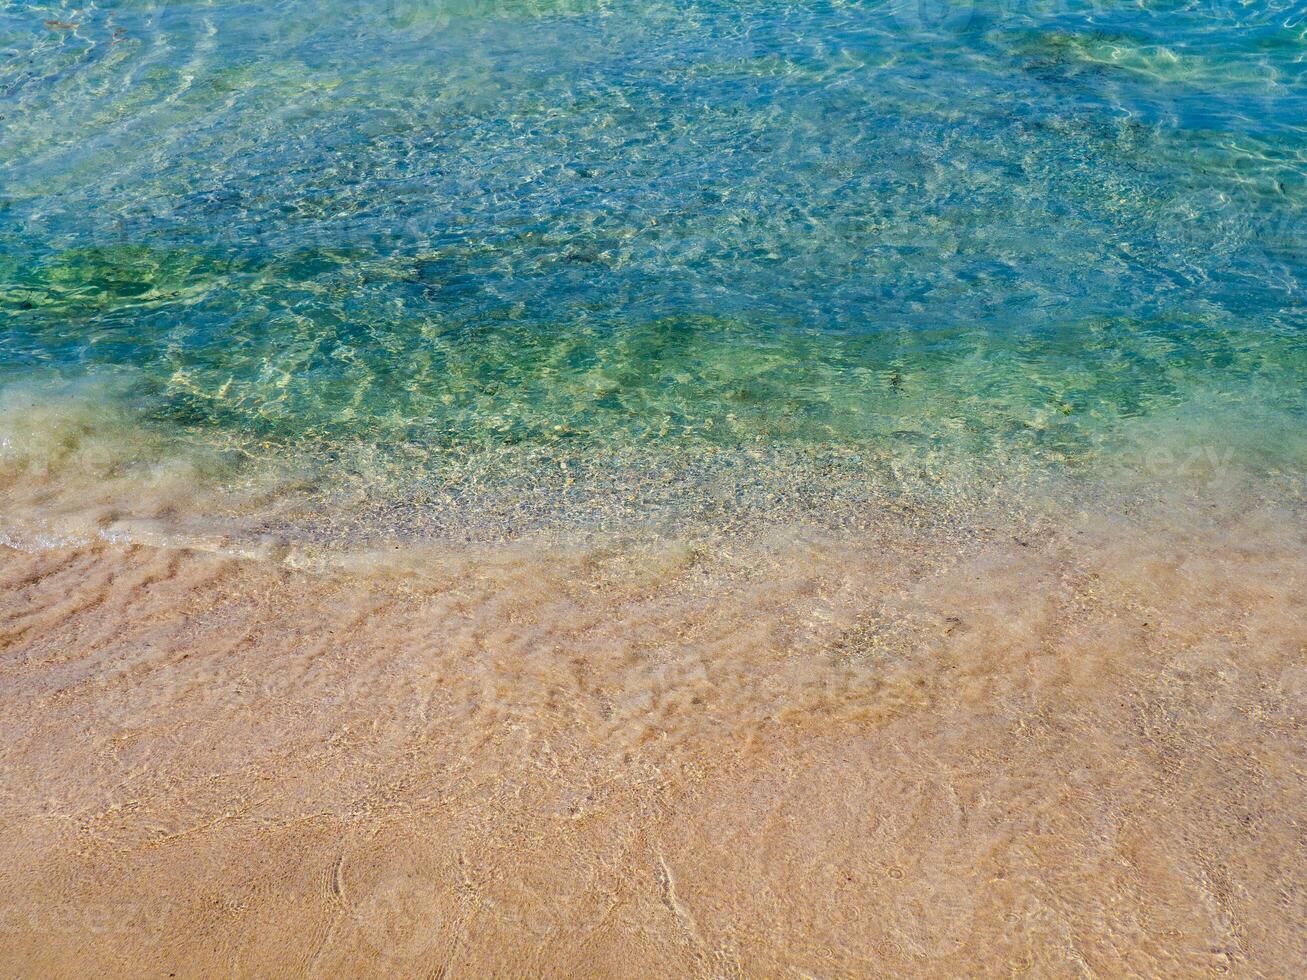 Orange sands and crystal clear blue water - empty beach in Crete, Greece photo